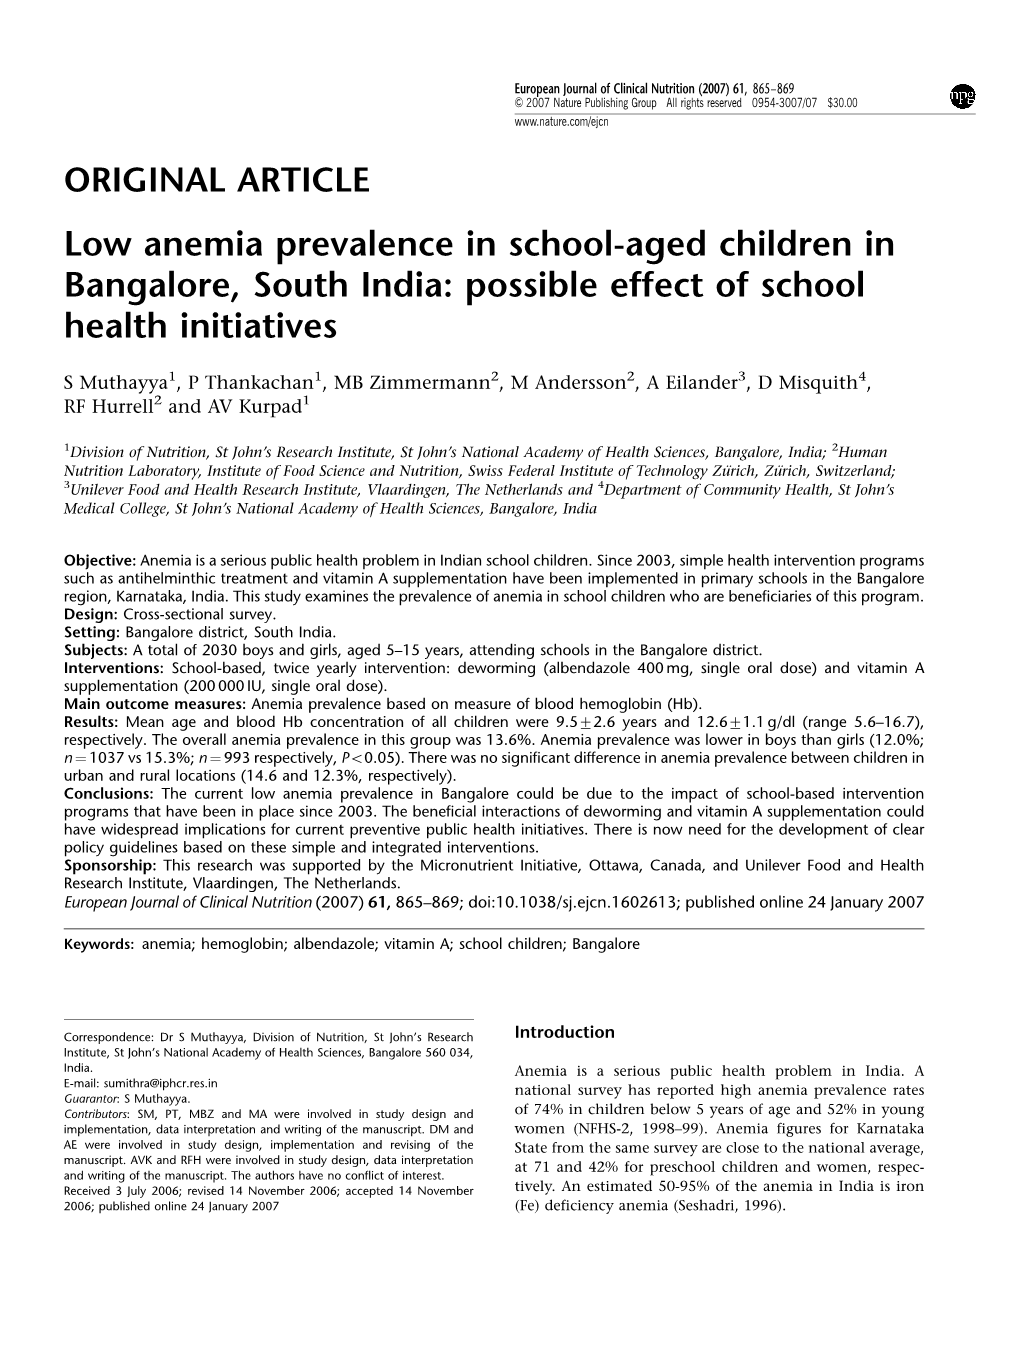 Low Anemia Prevalence in School-Aged Children in Bangalore, South India: Possible Effect of School Health Initiatives